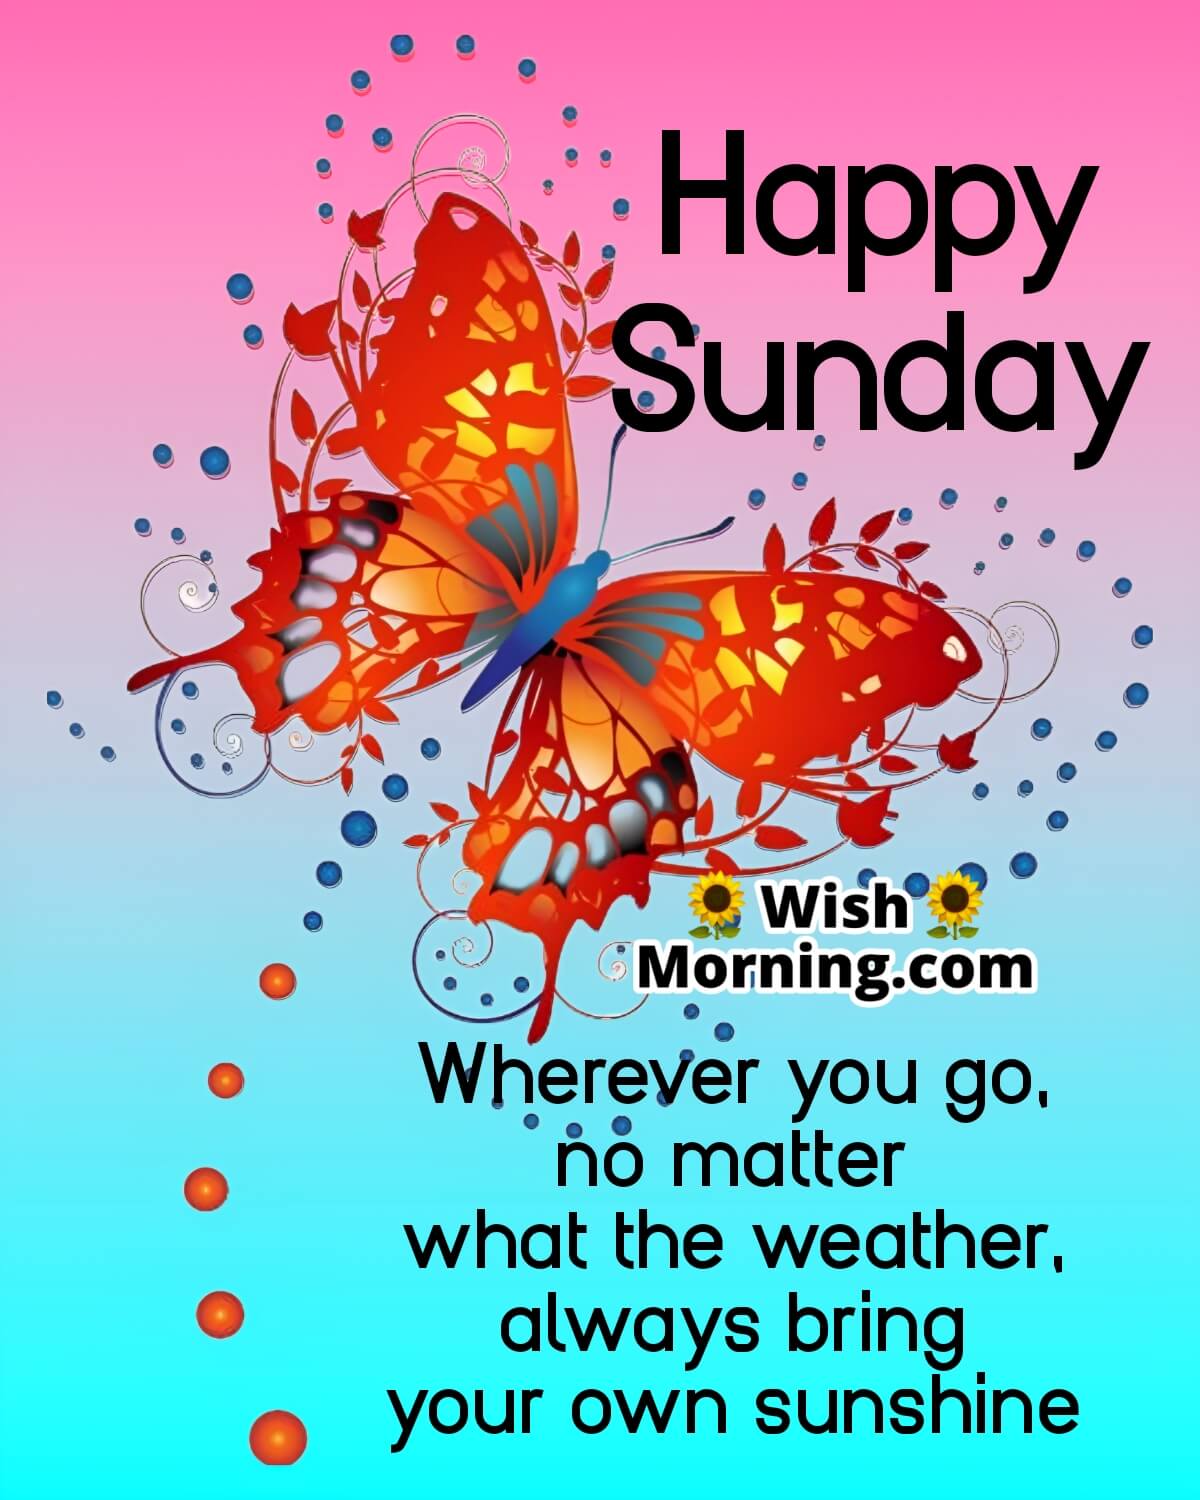 good morning and happy sunday quotes